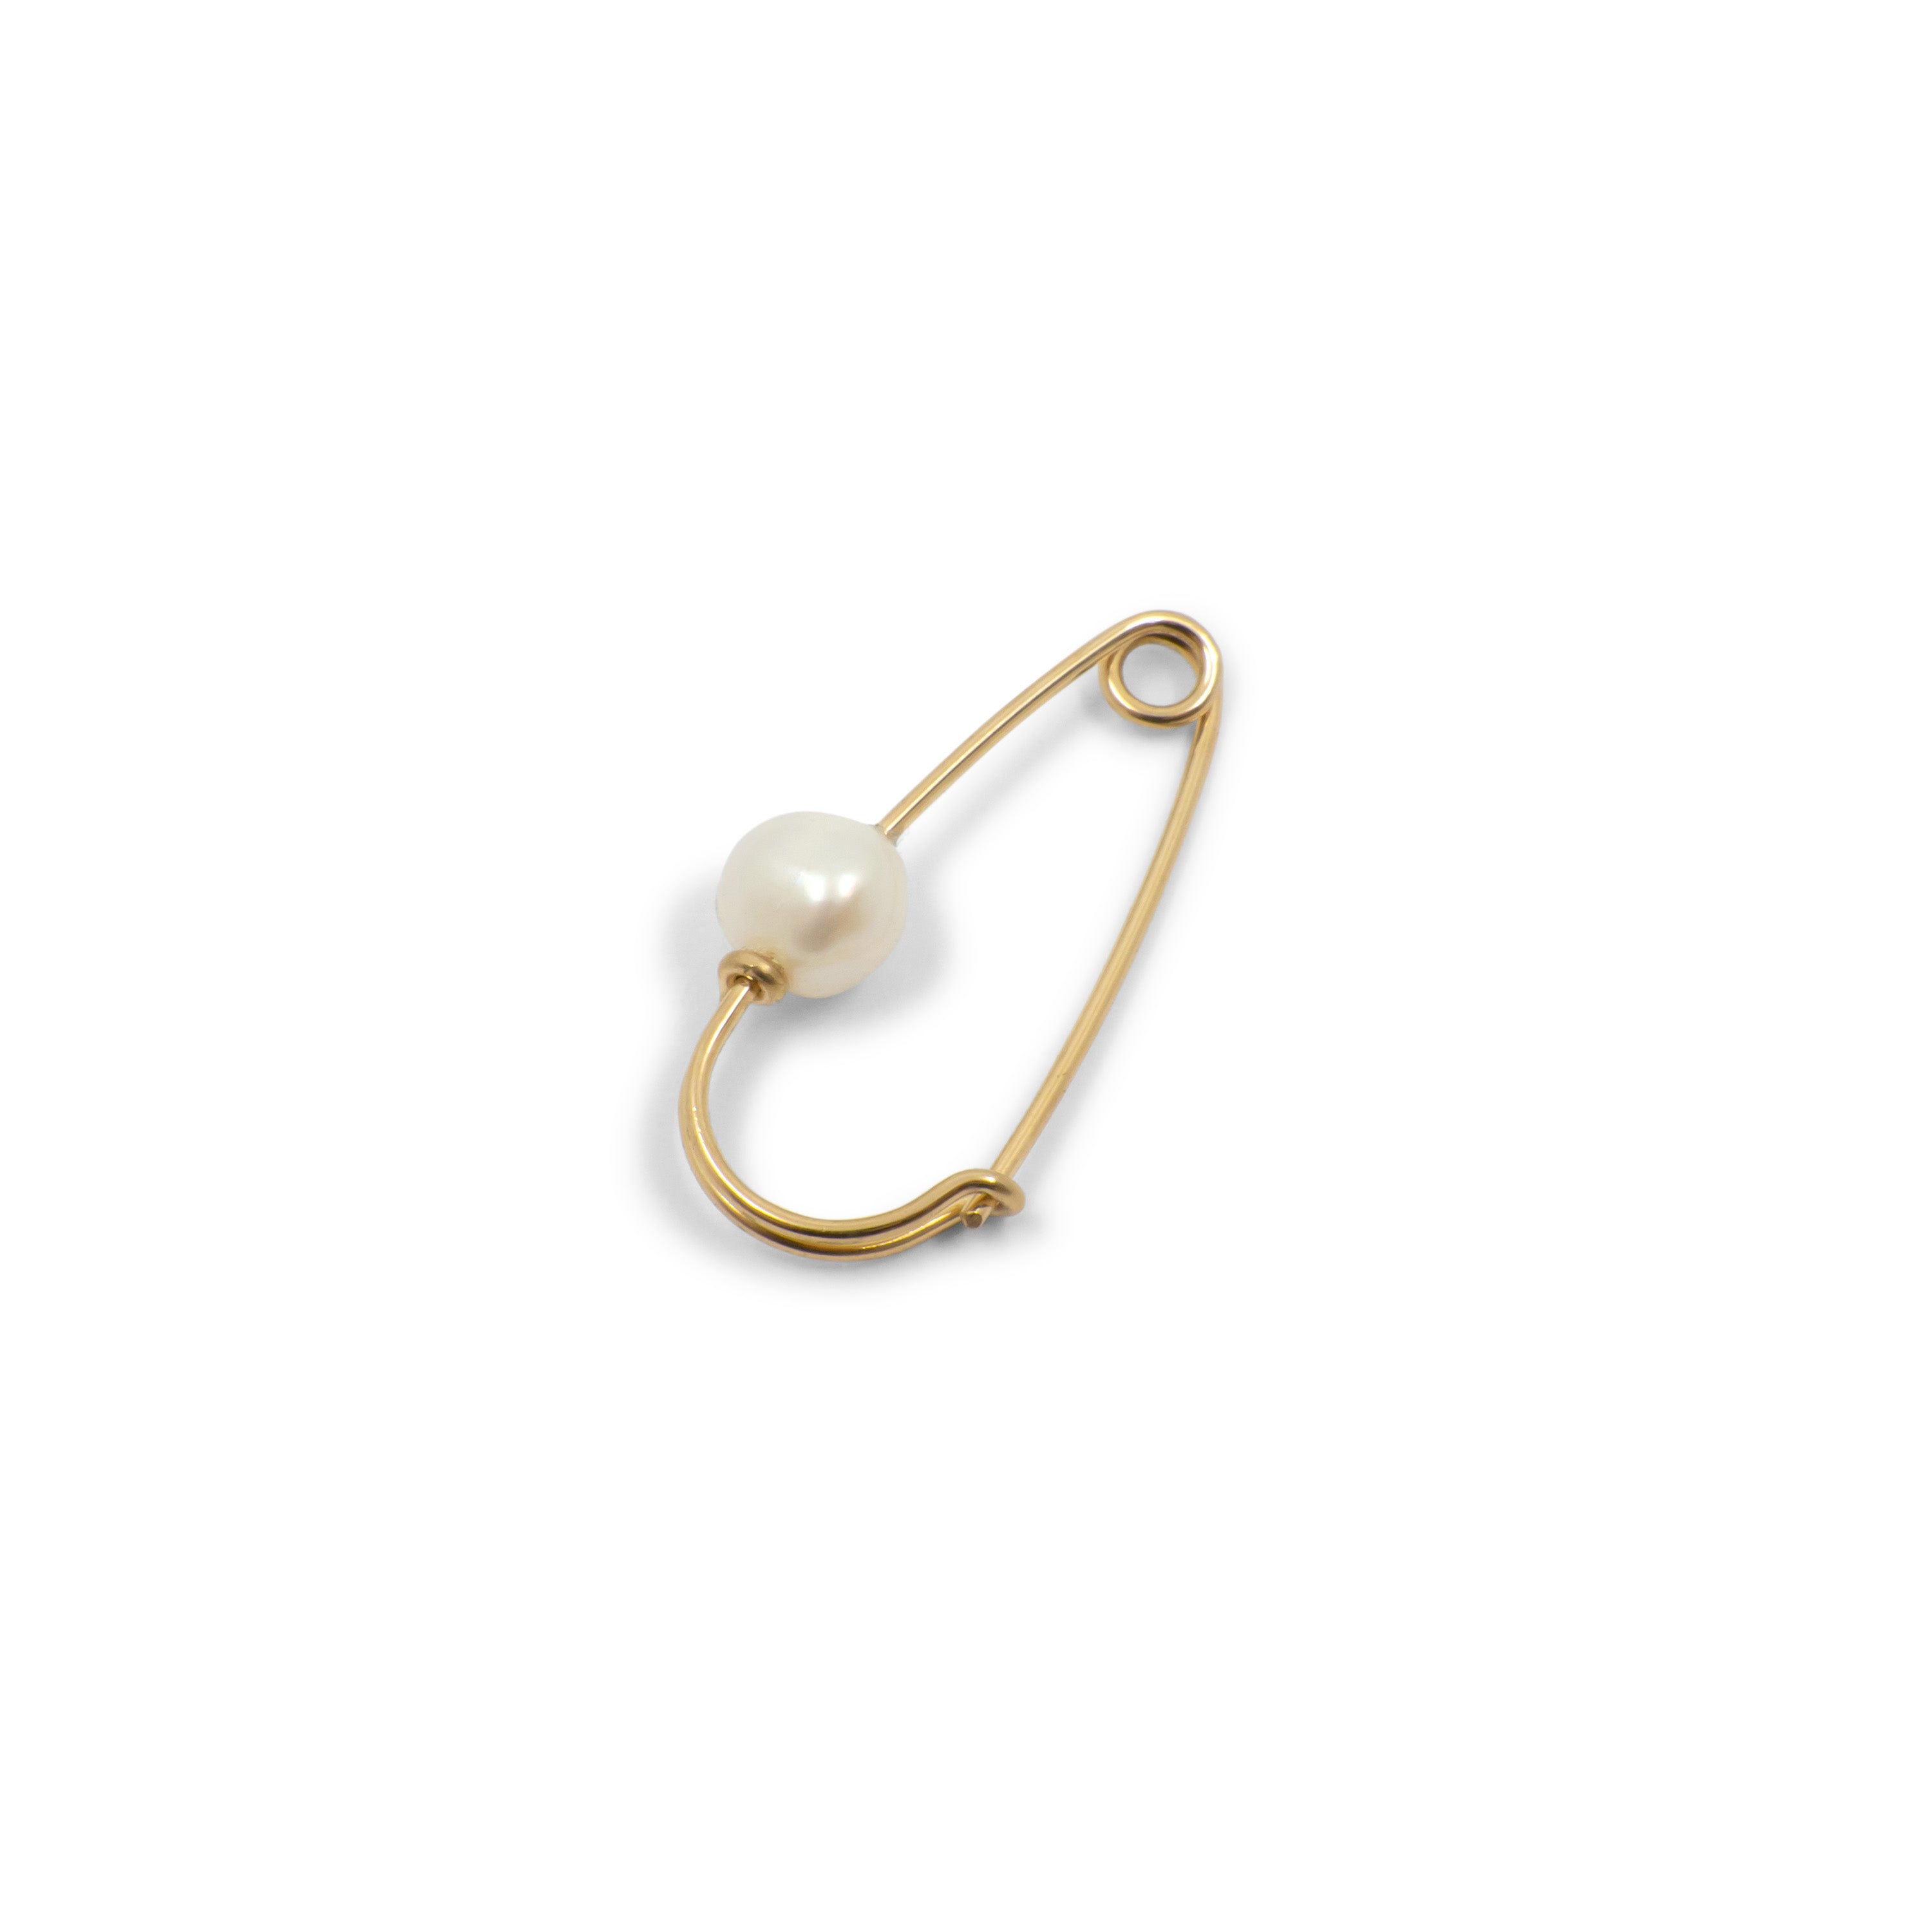 Wire Safety Pin Earrings - 14K Yellow Gold Single